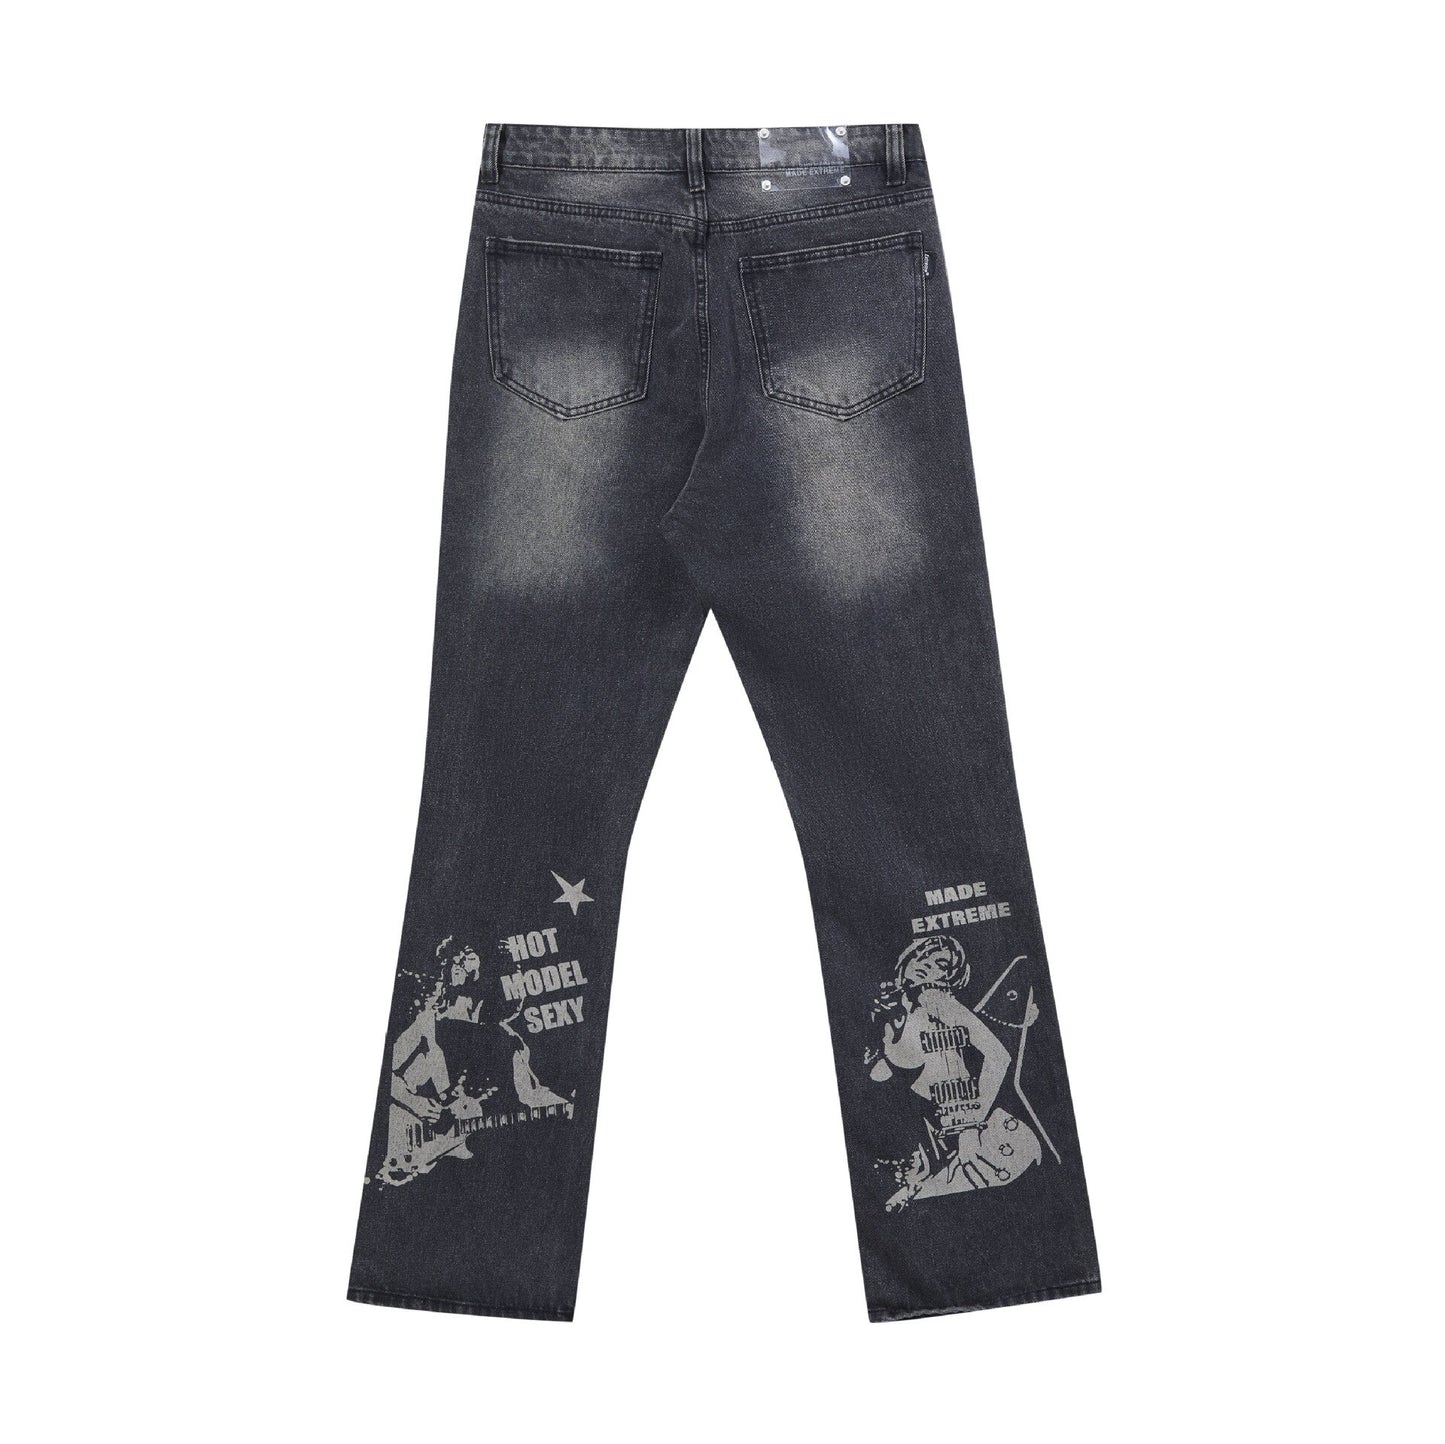 MADE EXTREME Chacter Print Hombre Jeans